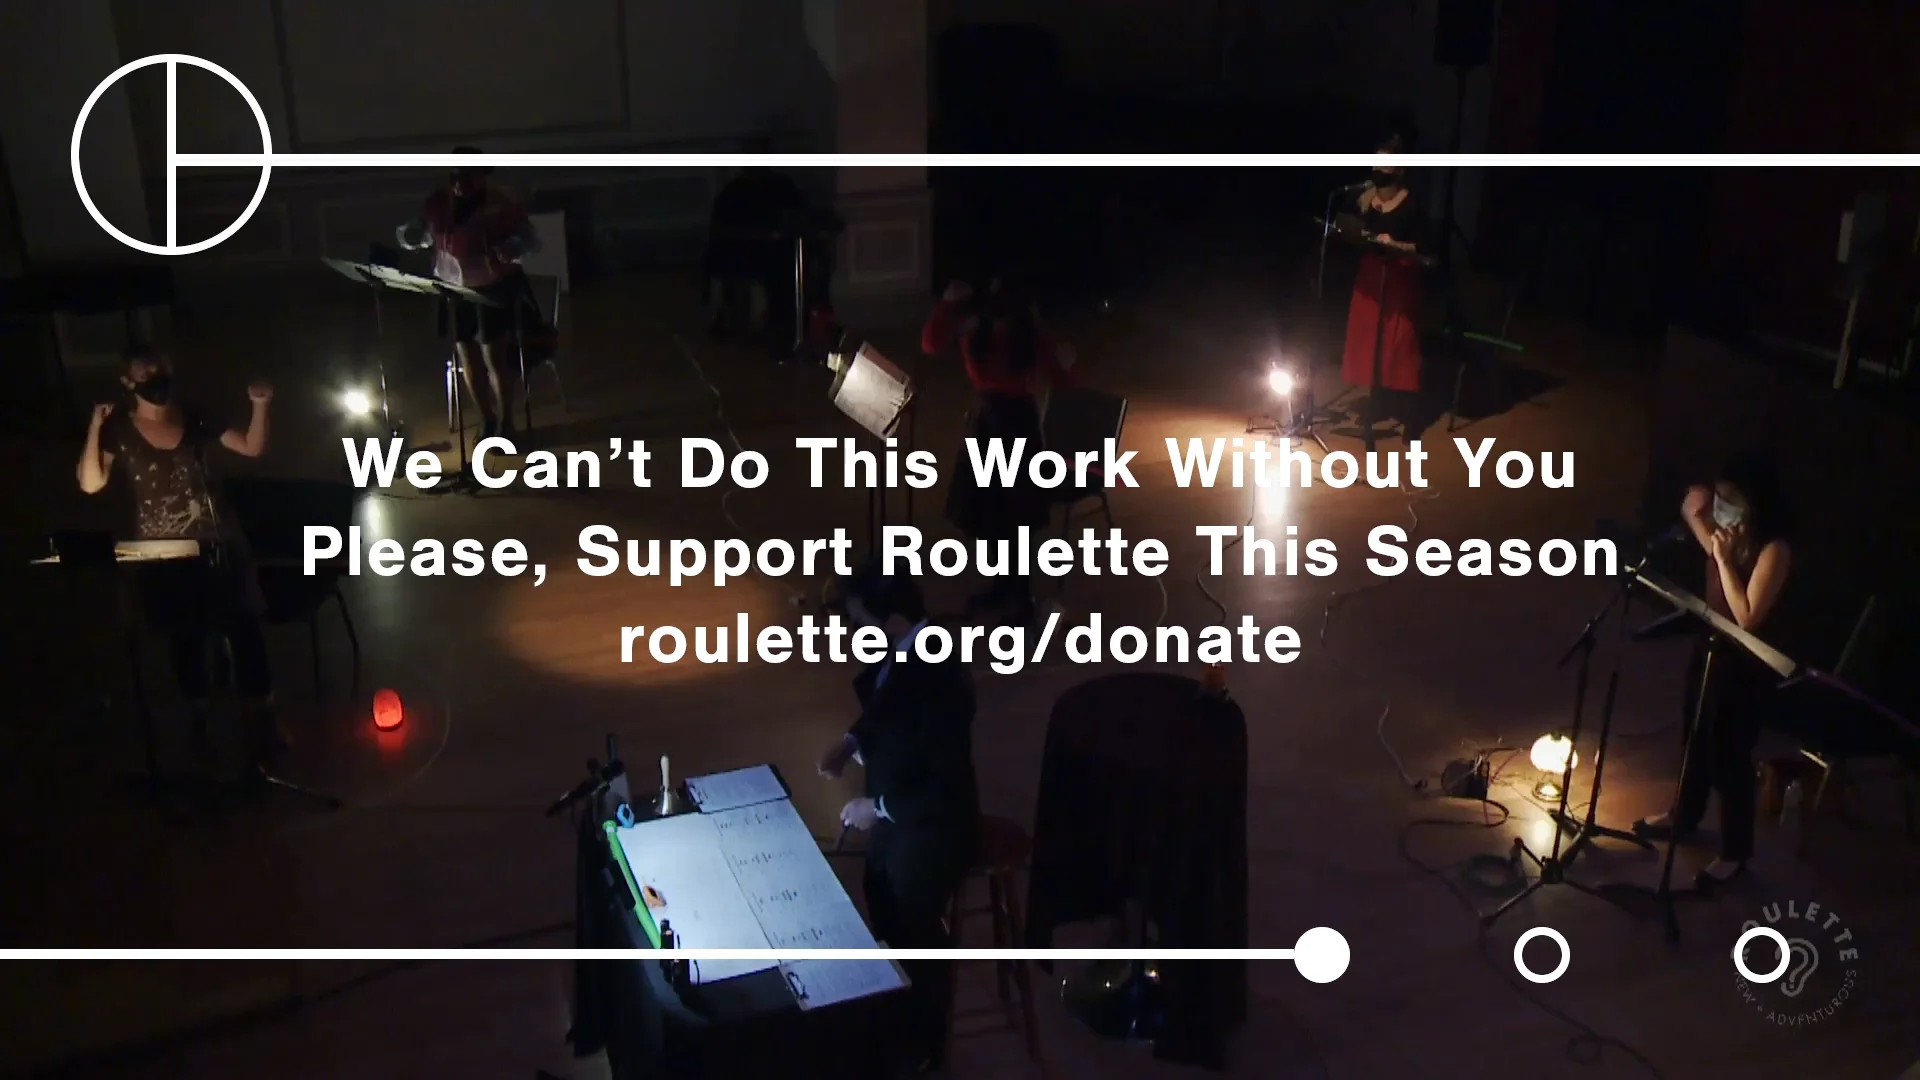 Support roulette